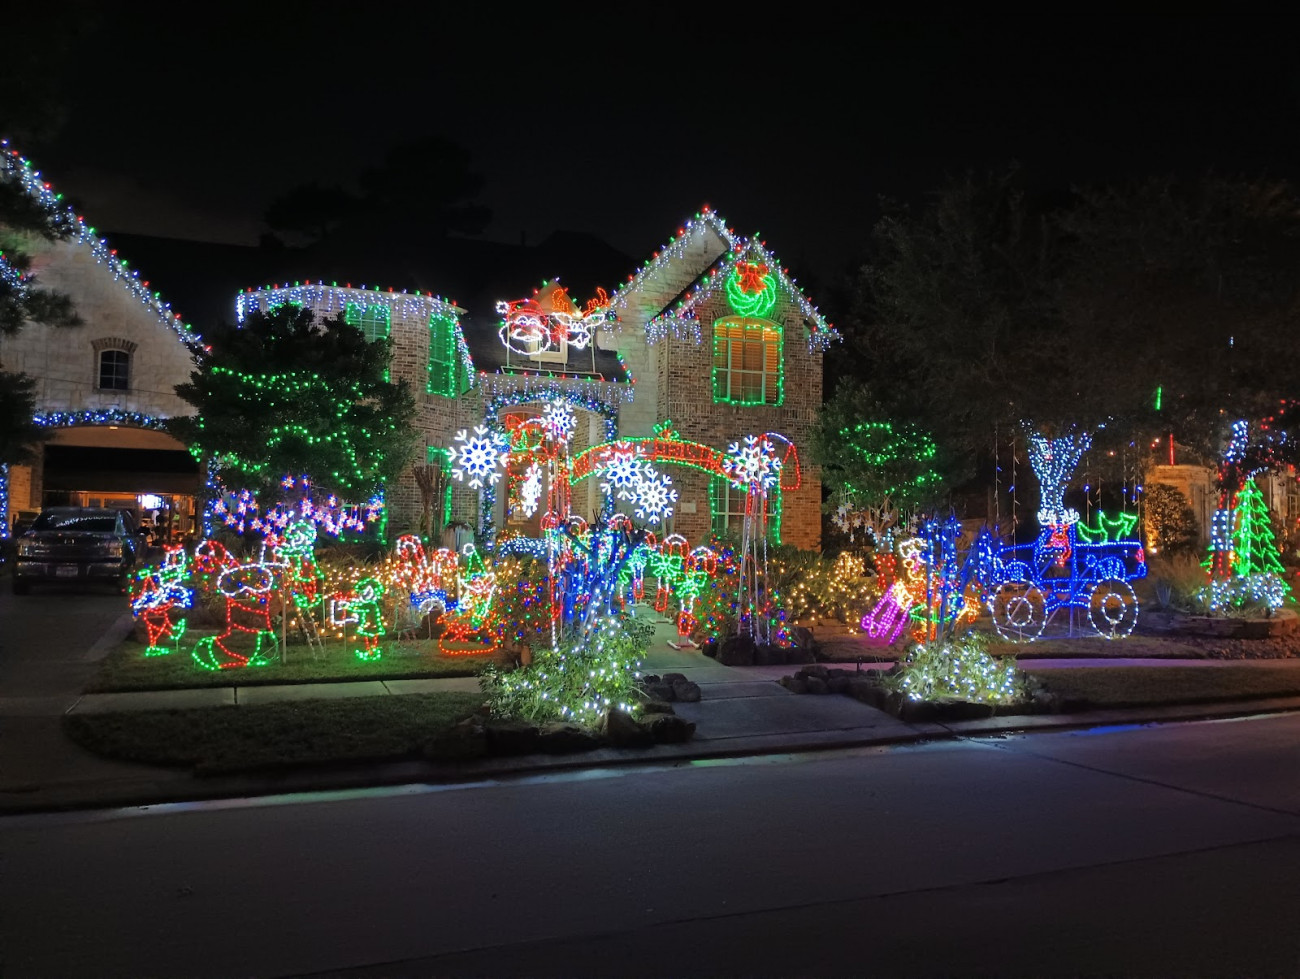 Holiday lights on a home in Humble, TX